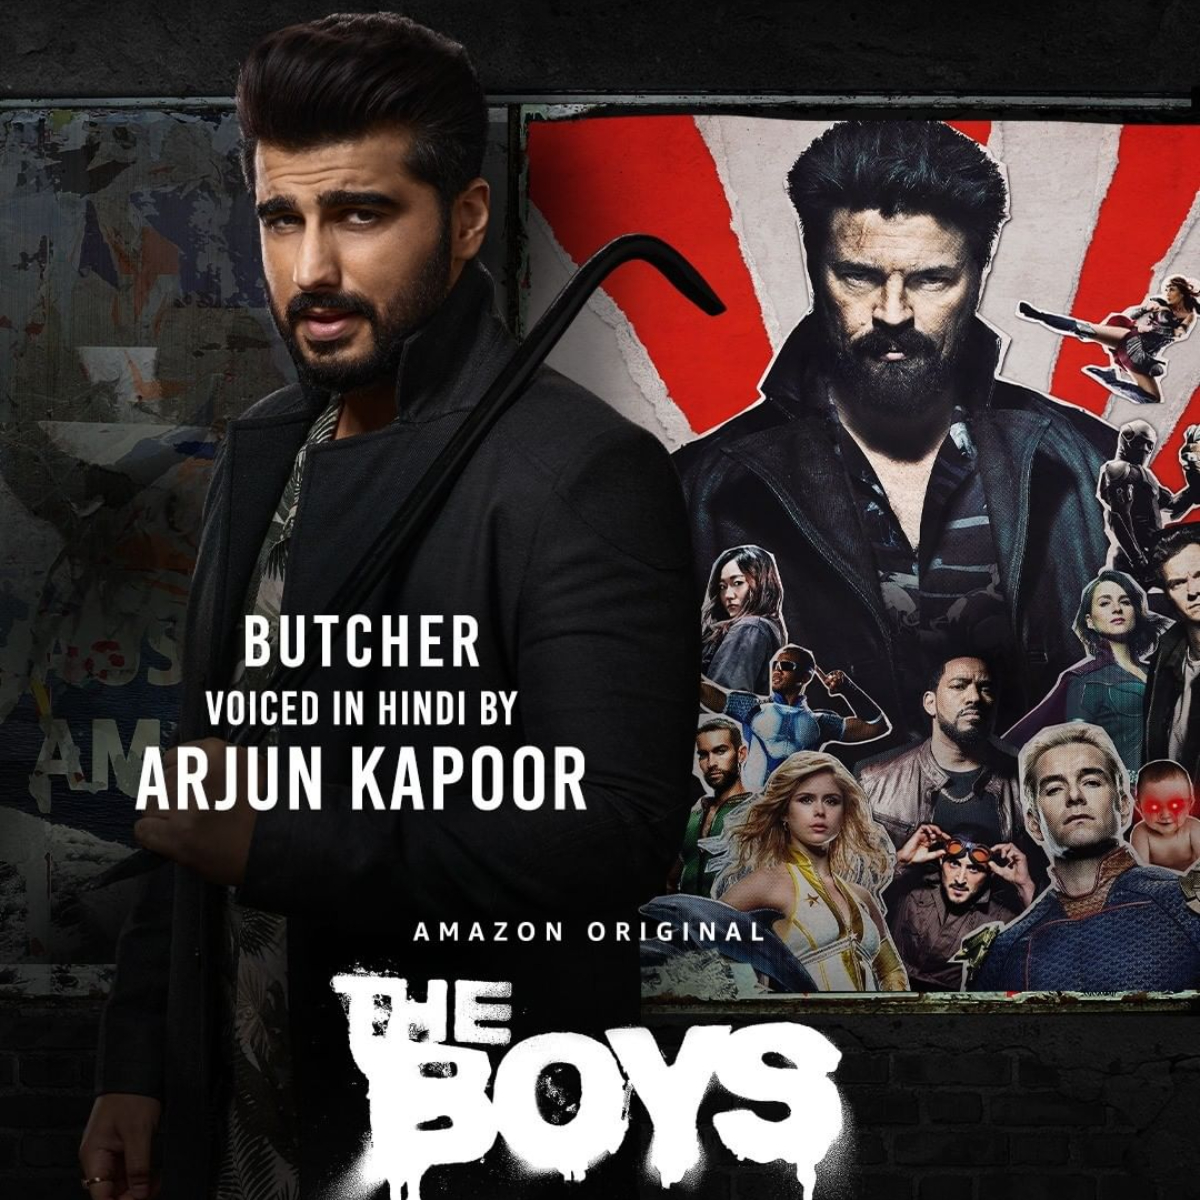 EXCLUSIVE: Arjun Kapoor on dubbing experience for The Boys hindi ver, Karl Urban & what he wants to see in S3